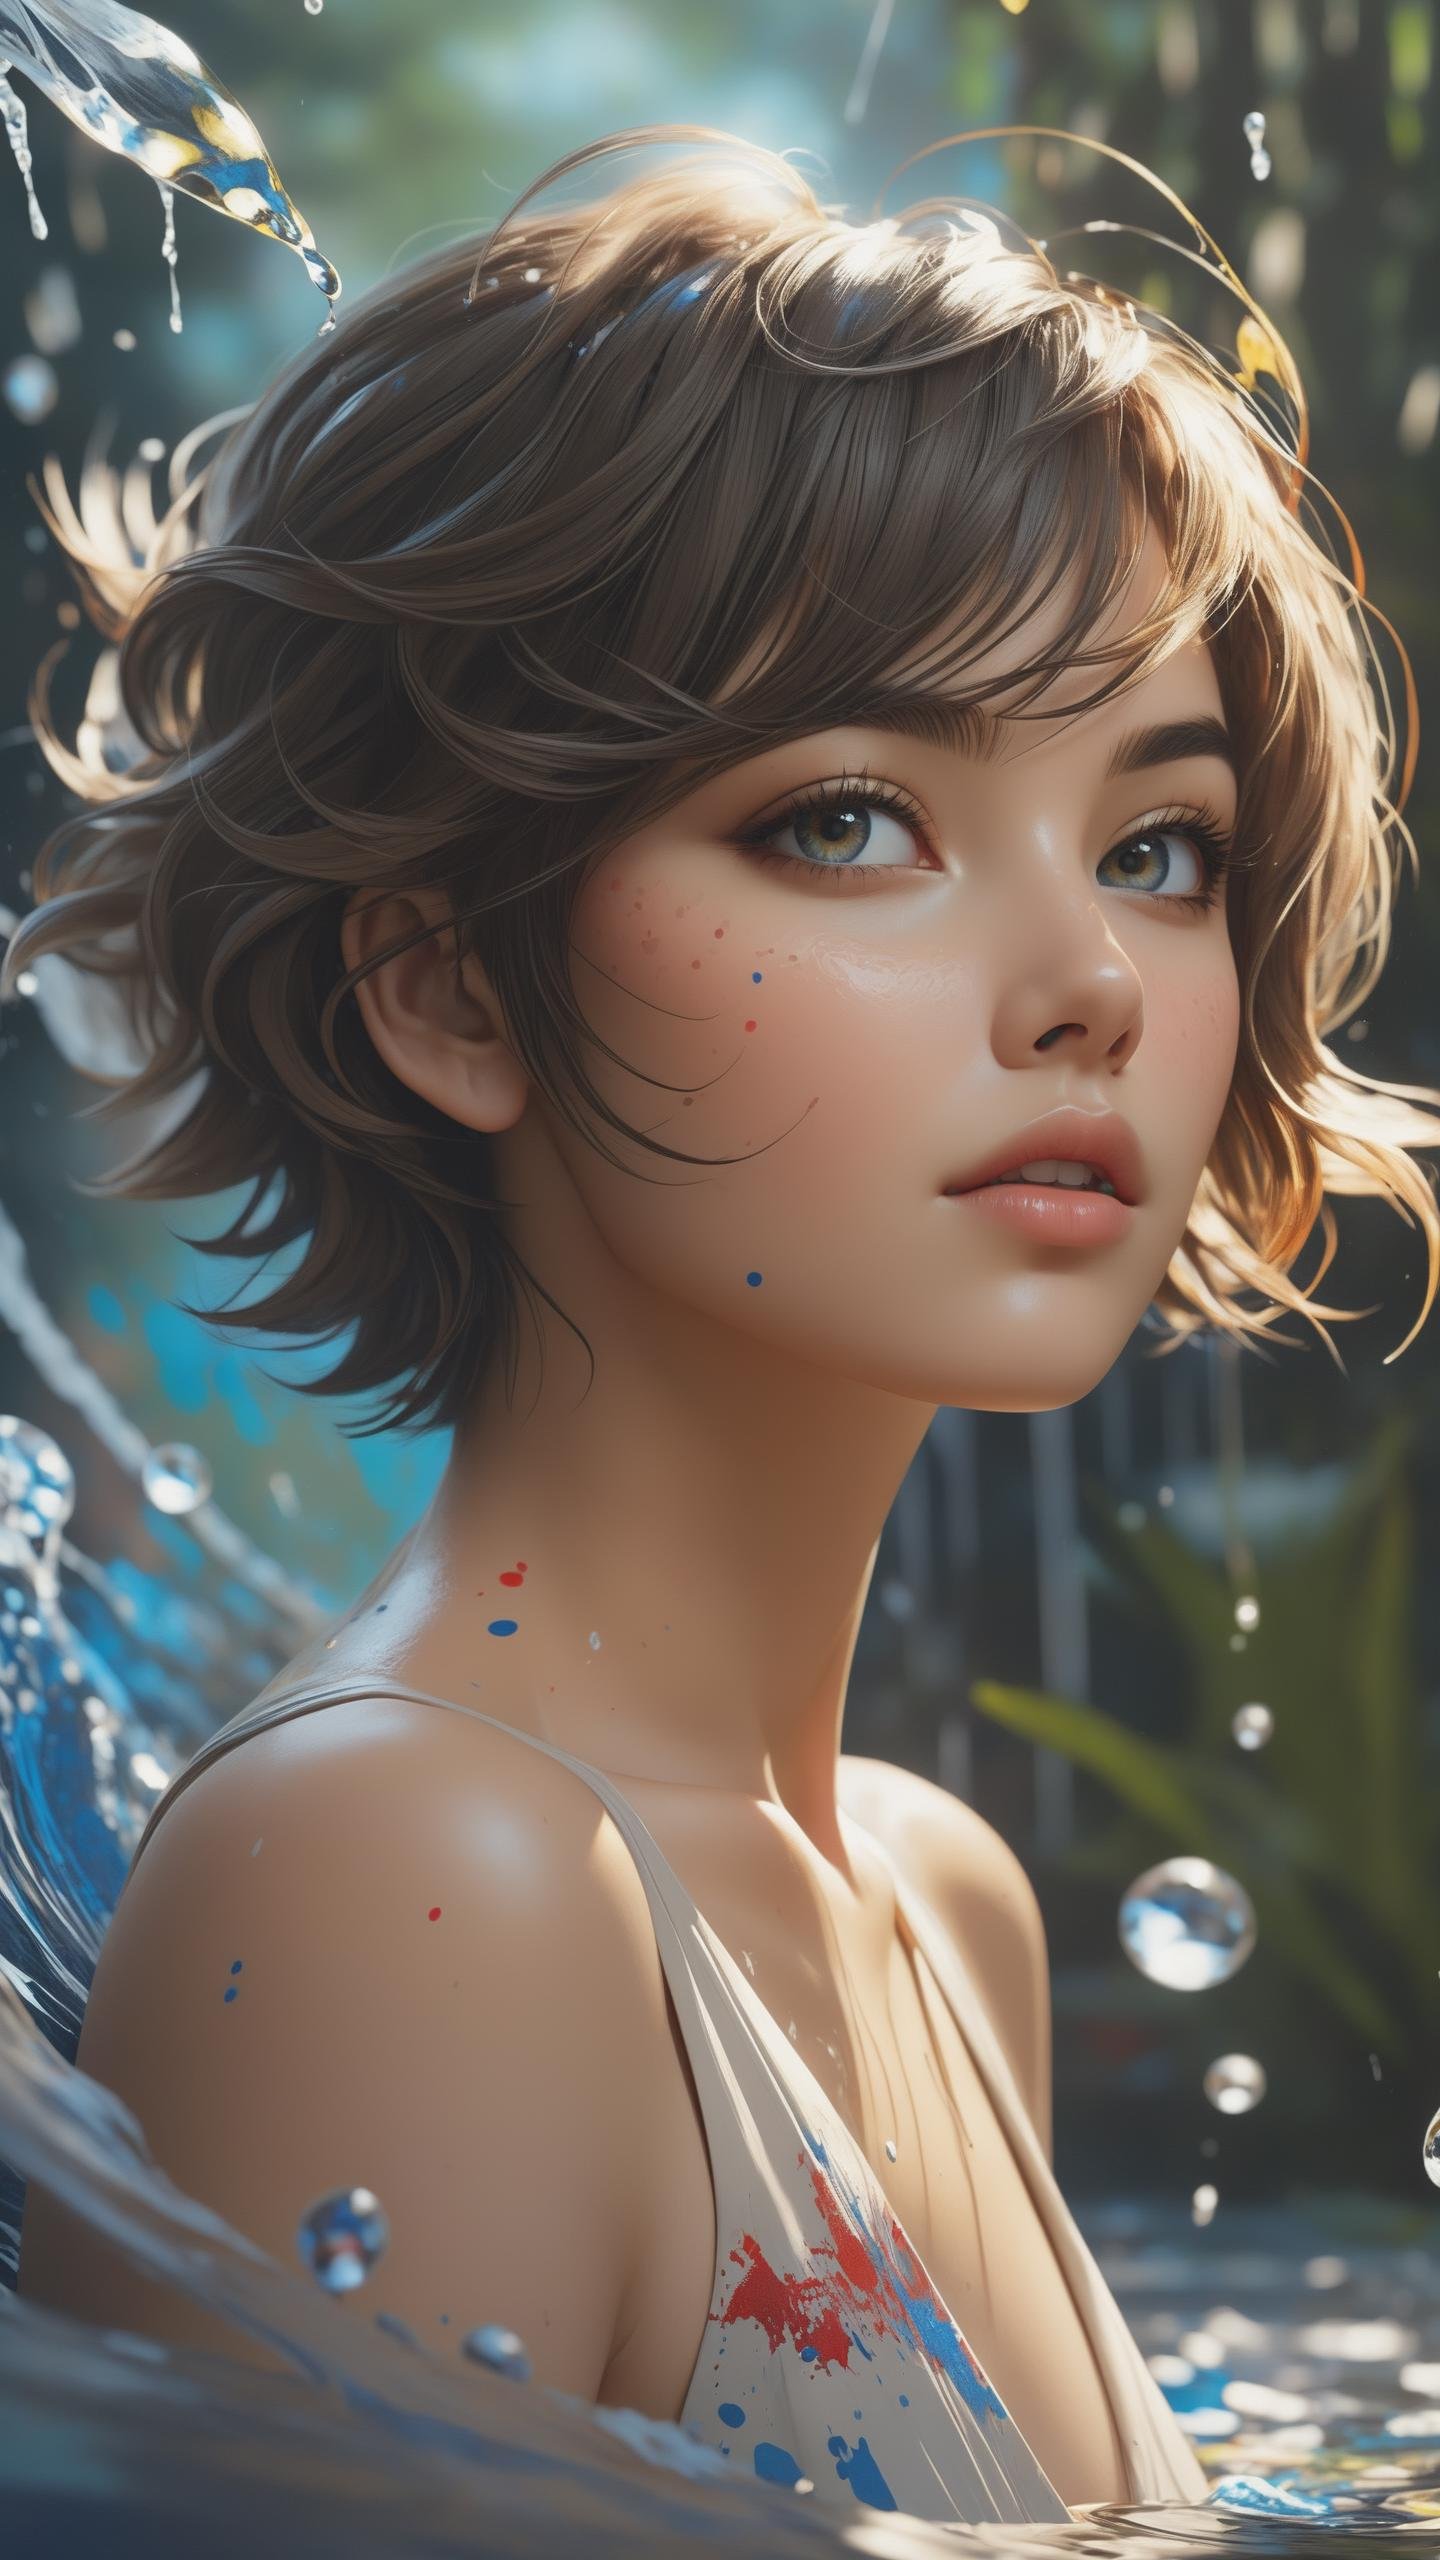 (splattered masterpiece:1.5), (best quality:1.2), (aesthetic + beautiful + harmonic), sharpen details, (intricate details:1.2), (detailed face, detailed body, detailed eyes, detailed mouth, detailed scenery, detailed hands:1.5), (beautiful girl, splattered short hair), light colored eyes, splattered clothes, (water colored splattered background:1.5), ASCIIfine detail, intricate, elegant, complex, highly enhanced, dynamic ambient background, flowing colors, beautiful full color, aesthetic, very inspirational, intriguing, creative, appealing, lovely, marvelous, fabulous, magnificent, gorgeous, breathtaking artistic, sharp focus, clear professional, relaxed, extremely attractive, romantic, cinematic, dramatic, spectacular, by Jorg Karg